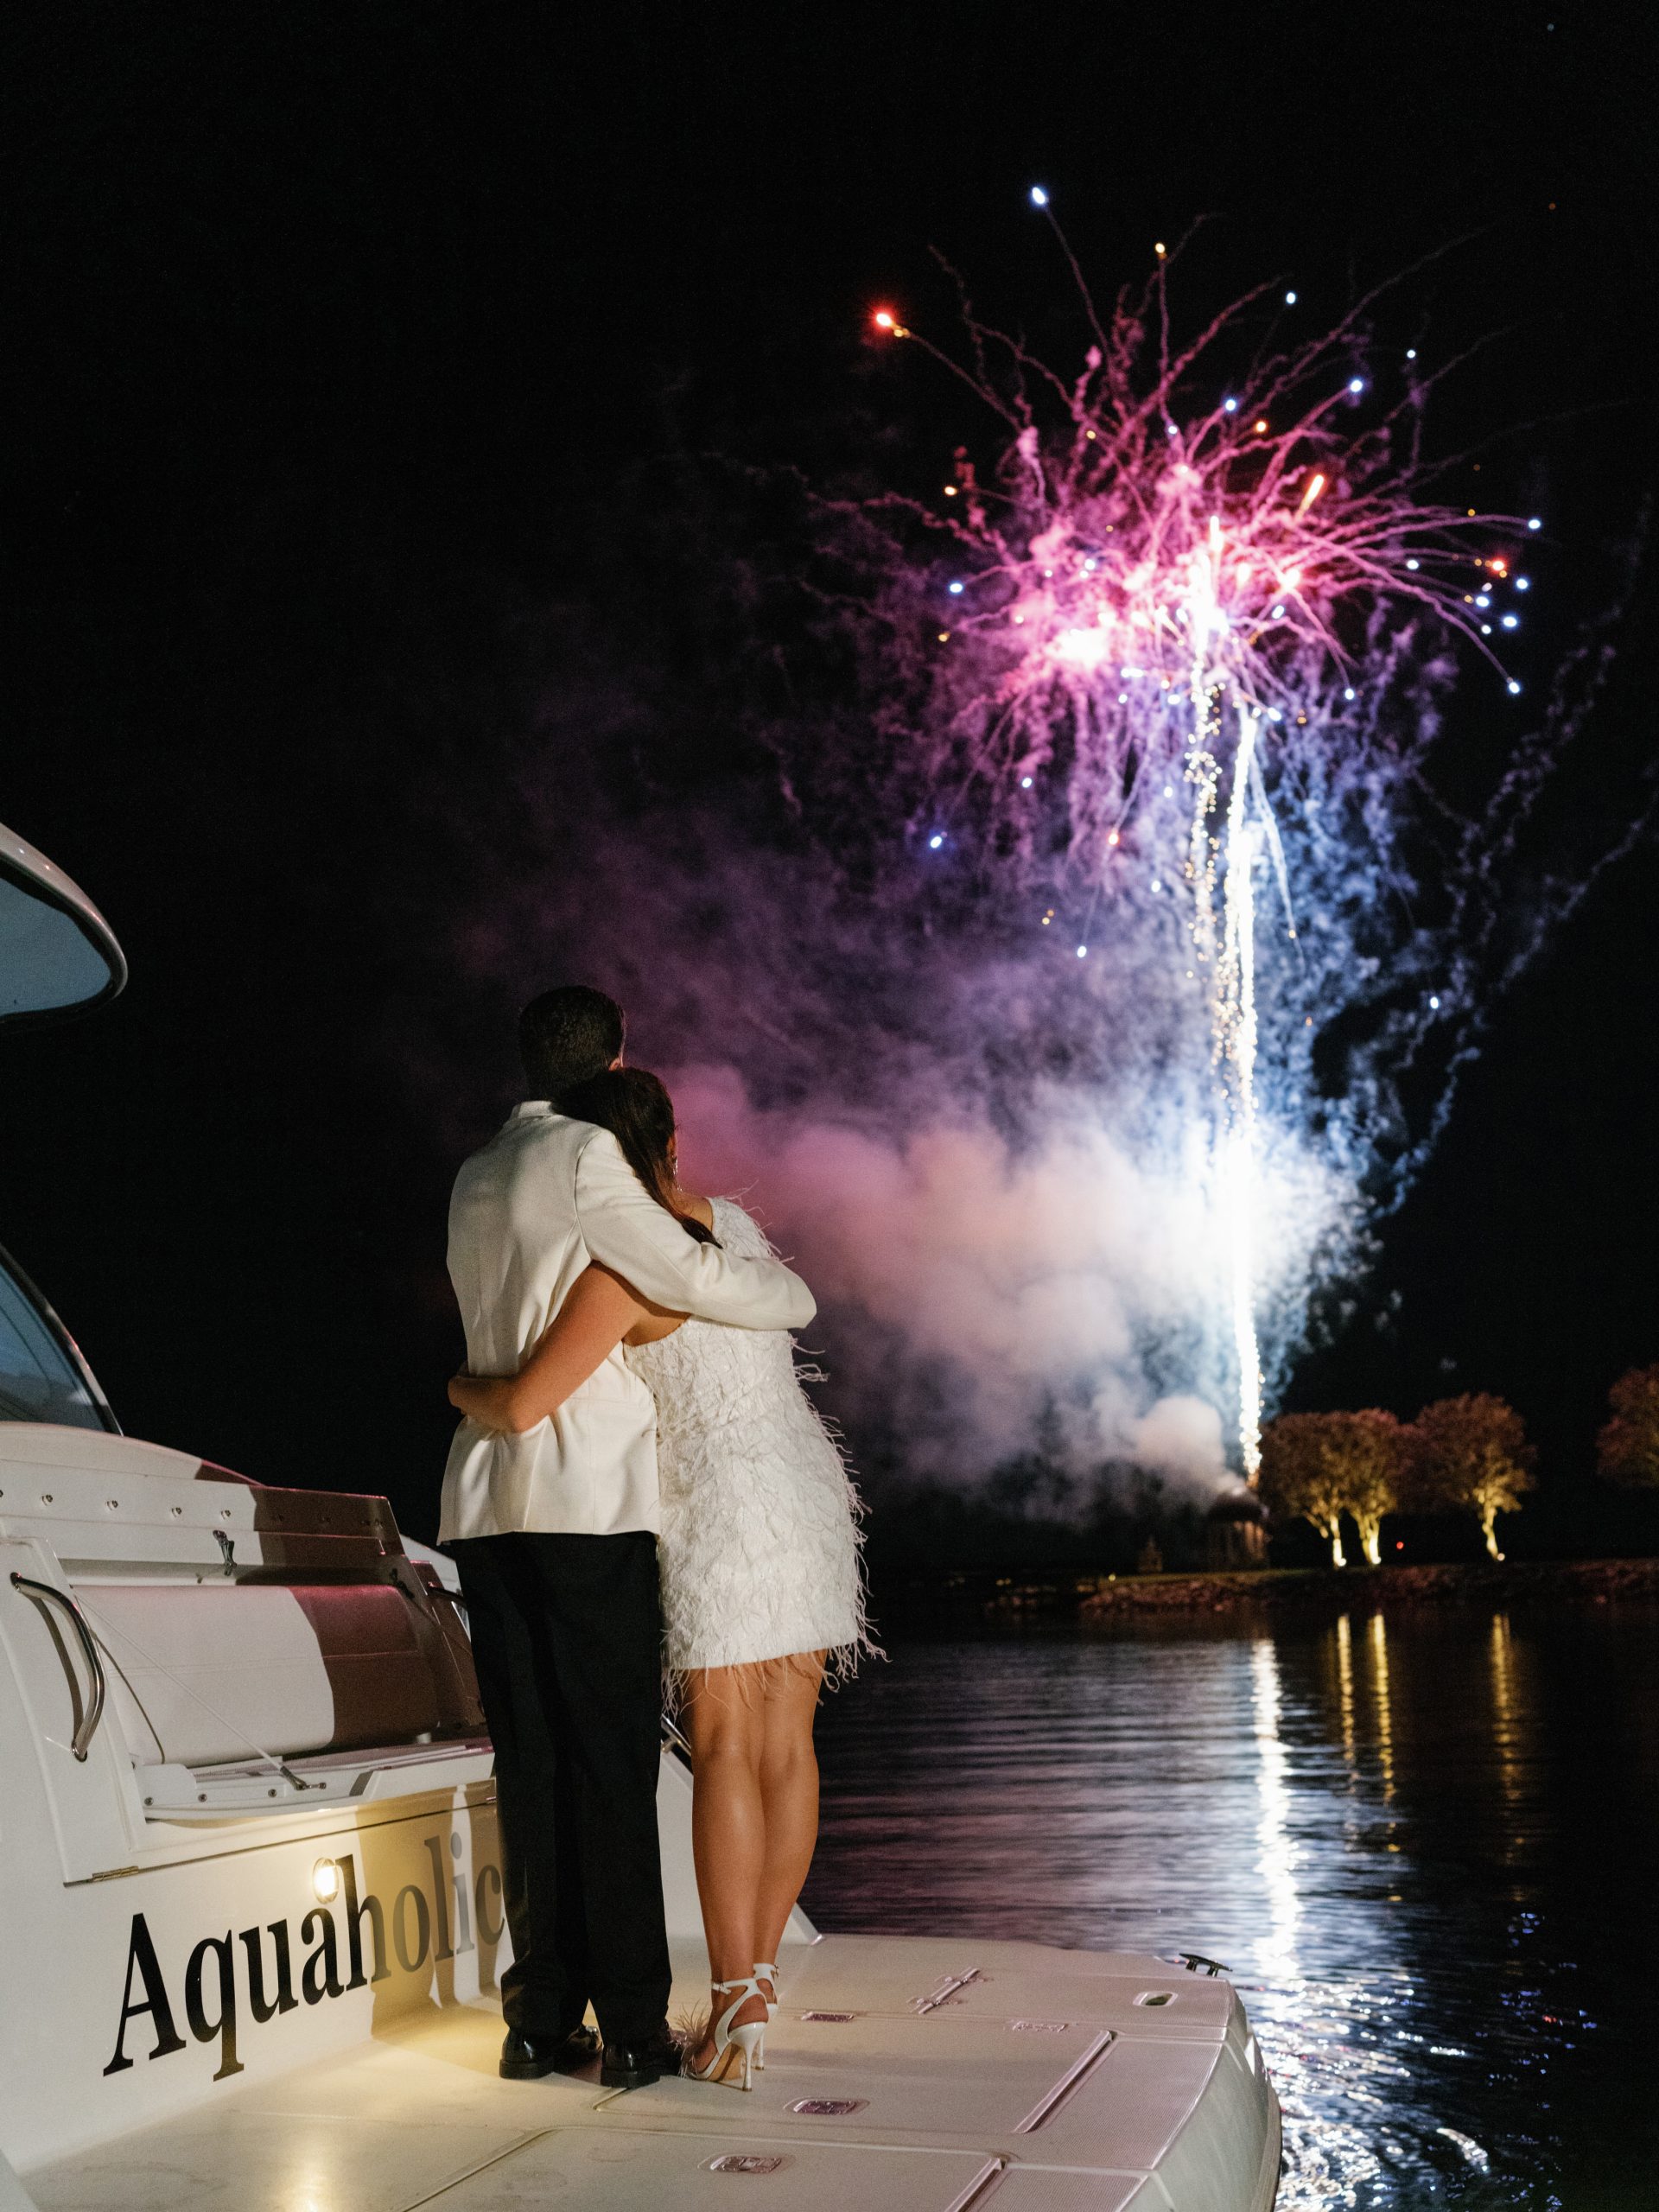 At the end of the evening, Fly Fidelity’s trombone and saxophone players joyously escorted the bride and groom to their point of exit, where they could watch a farewell display by Pennsylvania-based PyroTechnico Fireworks from the waters of Lake Murray.